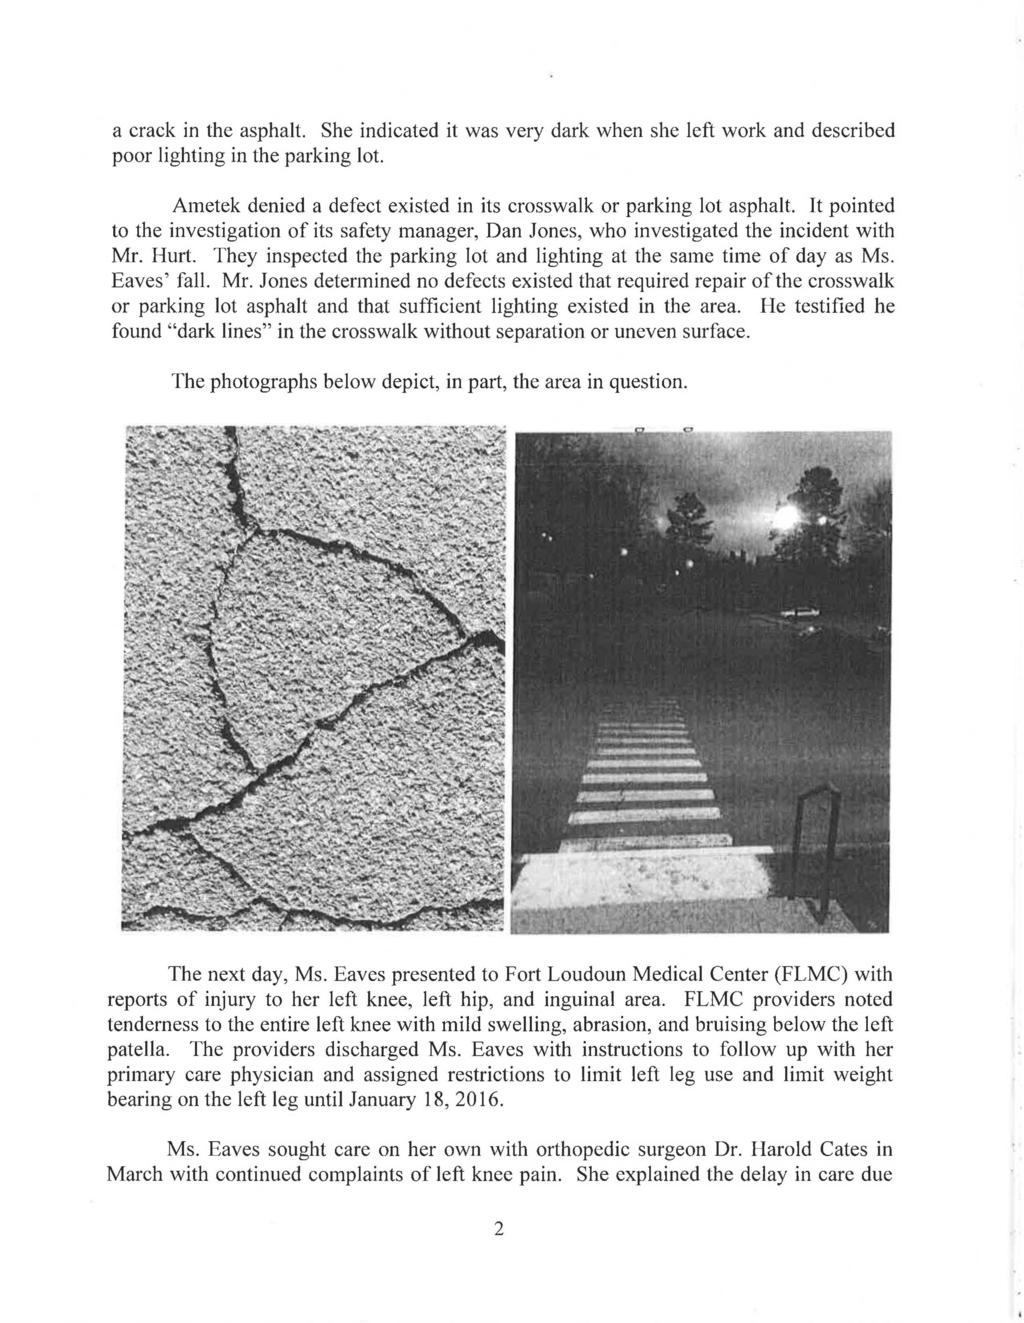 a crack in the asphalt. She indicated it was very dark when she left work and described poor lighting in the parking lot. Ametek denied a defect existed in its crosswalk or parking lot asphalt.